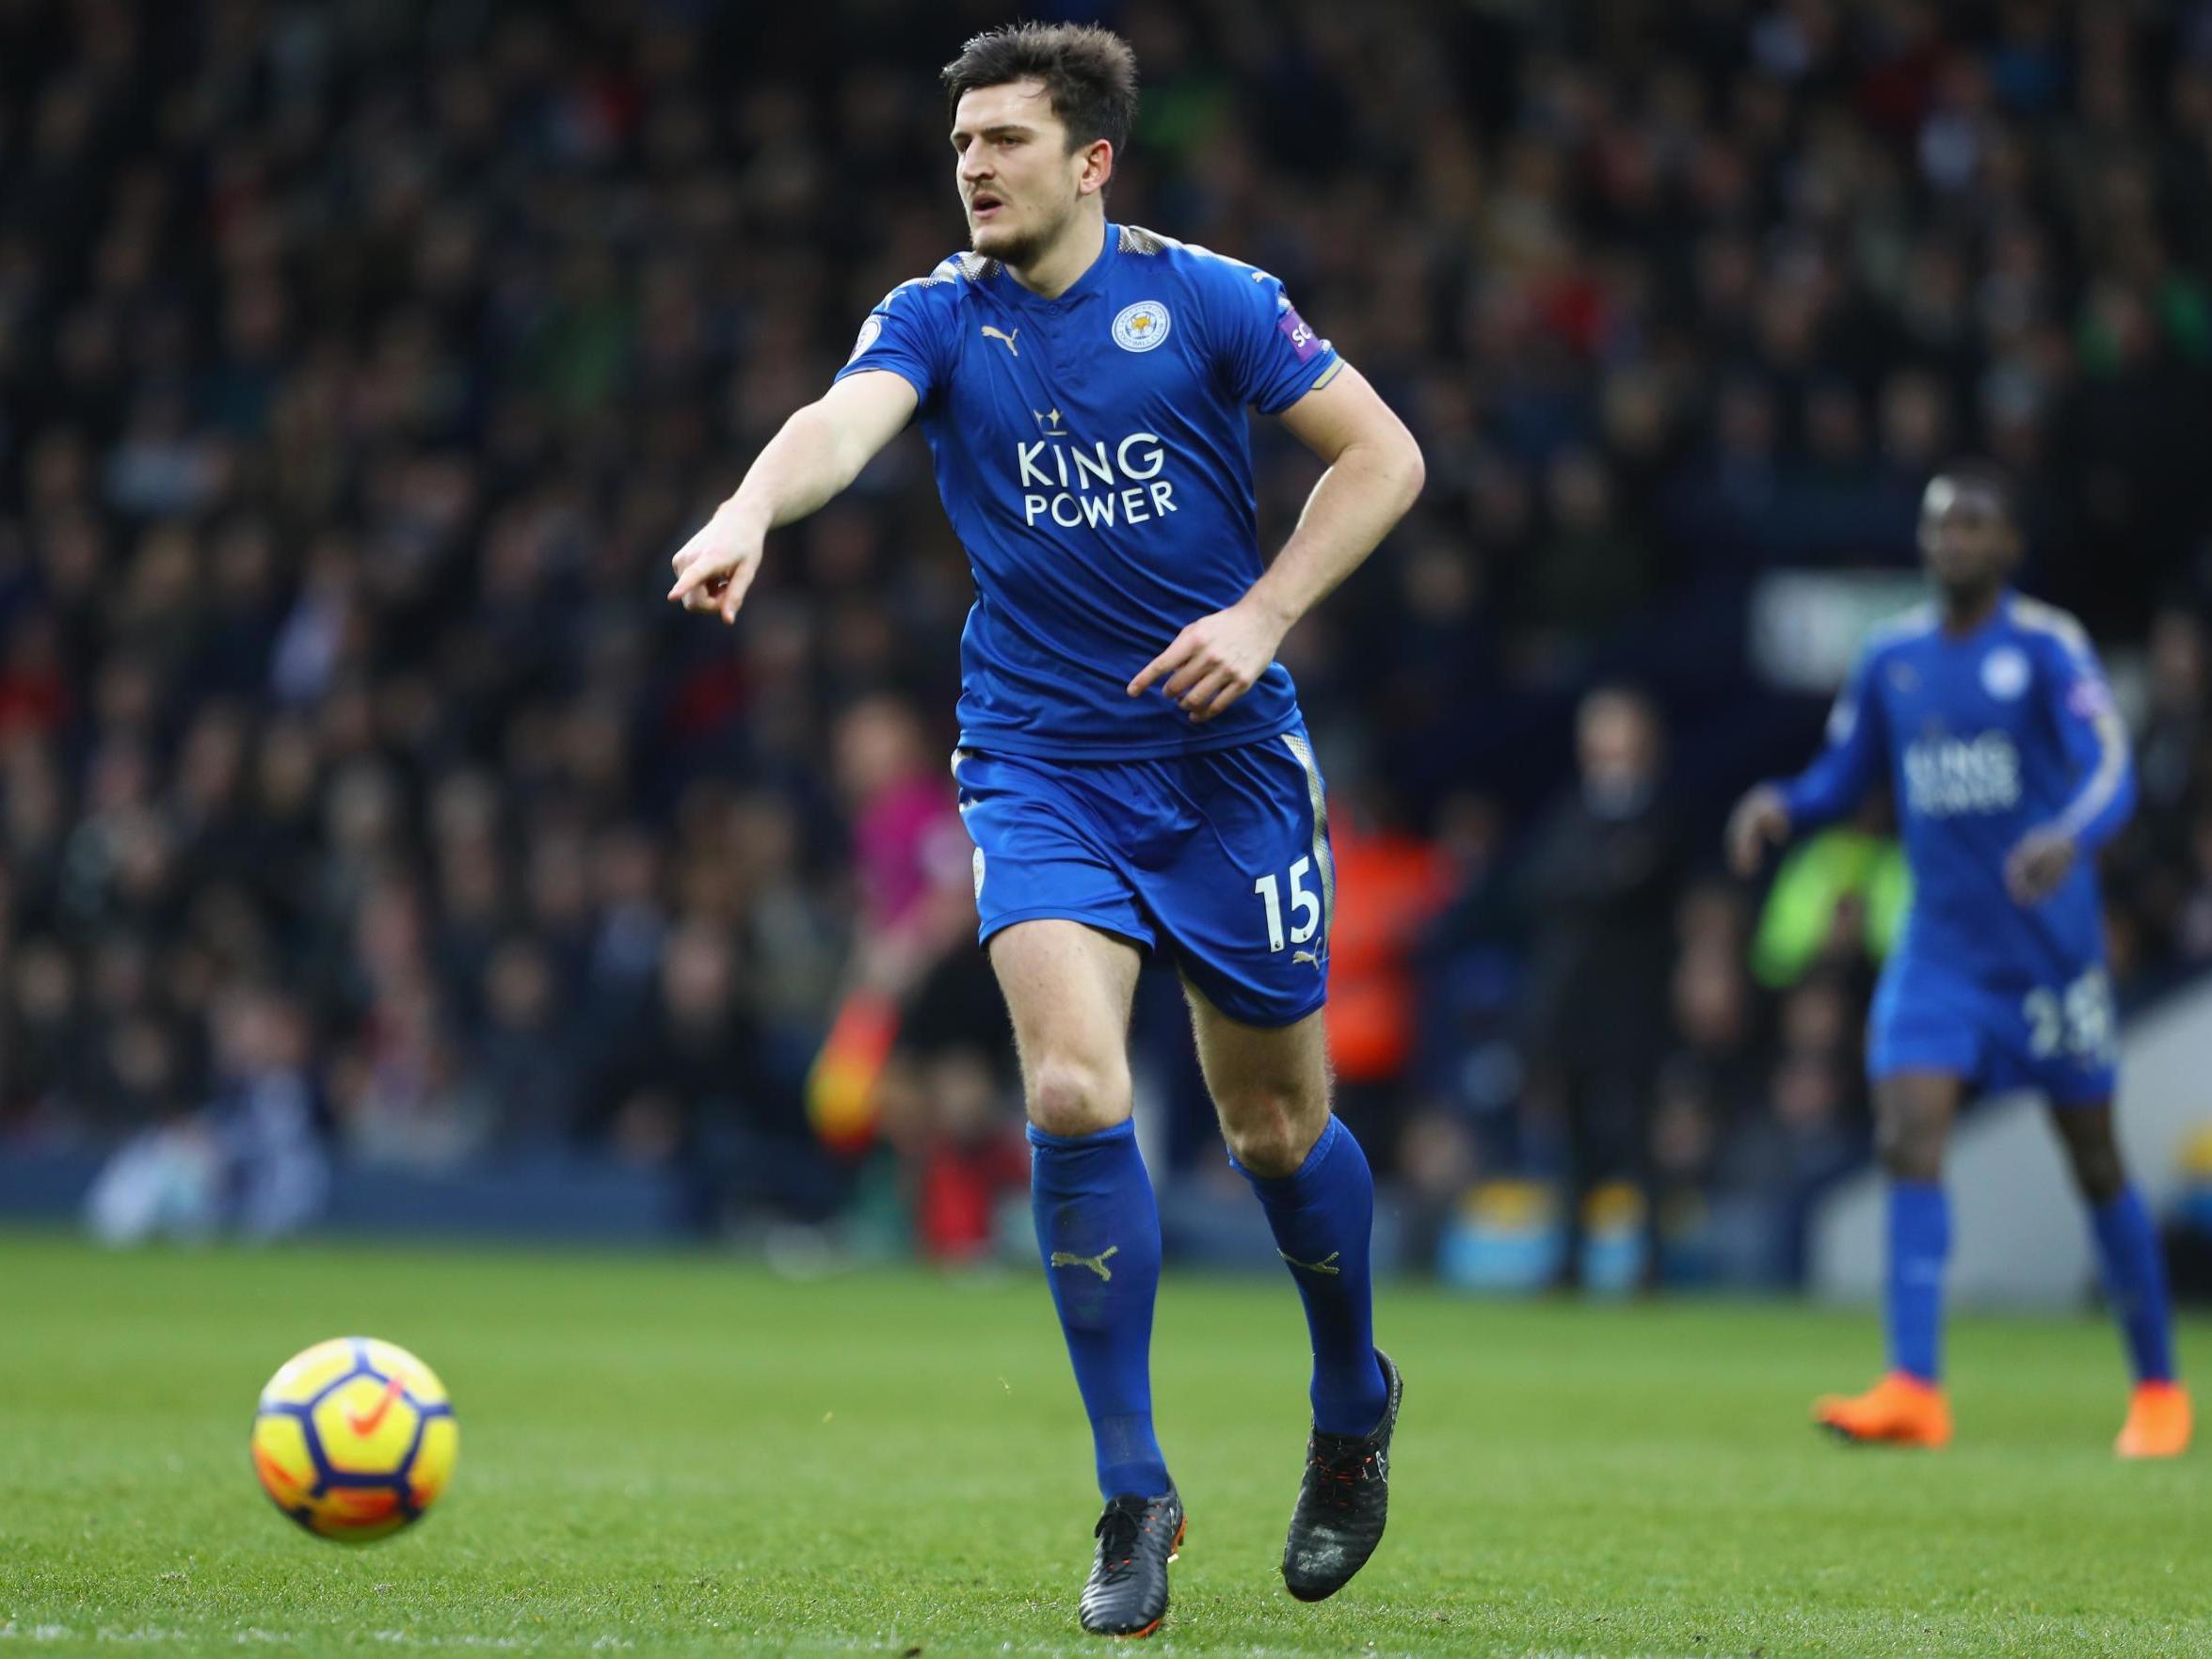 Harry Maguire will remain grounded after whirlwind summer, says